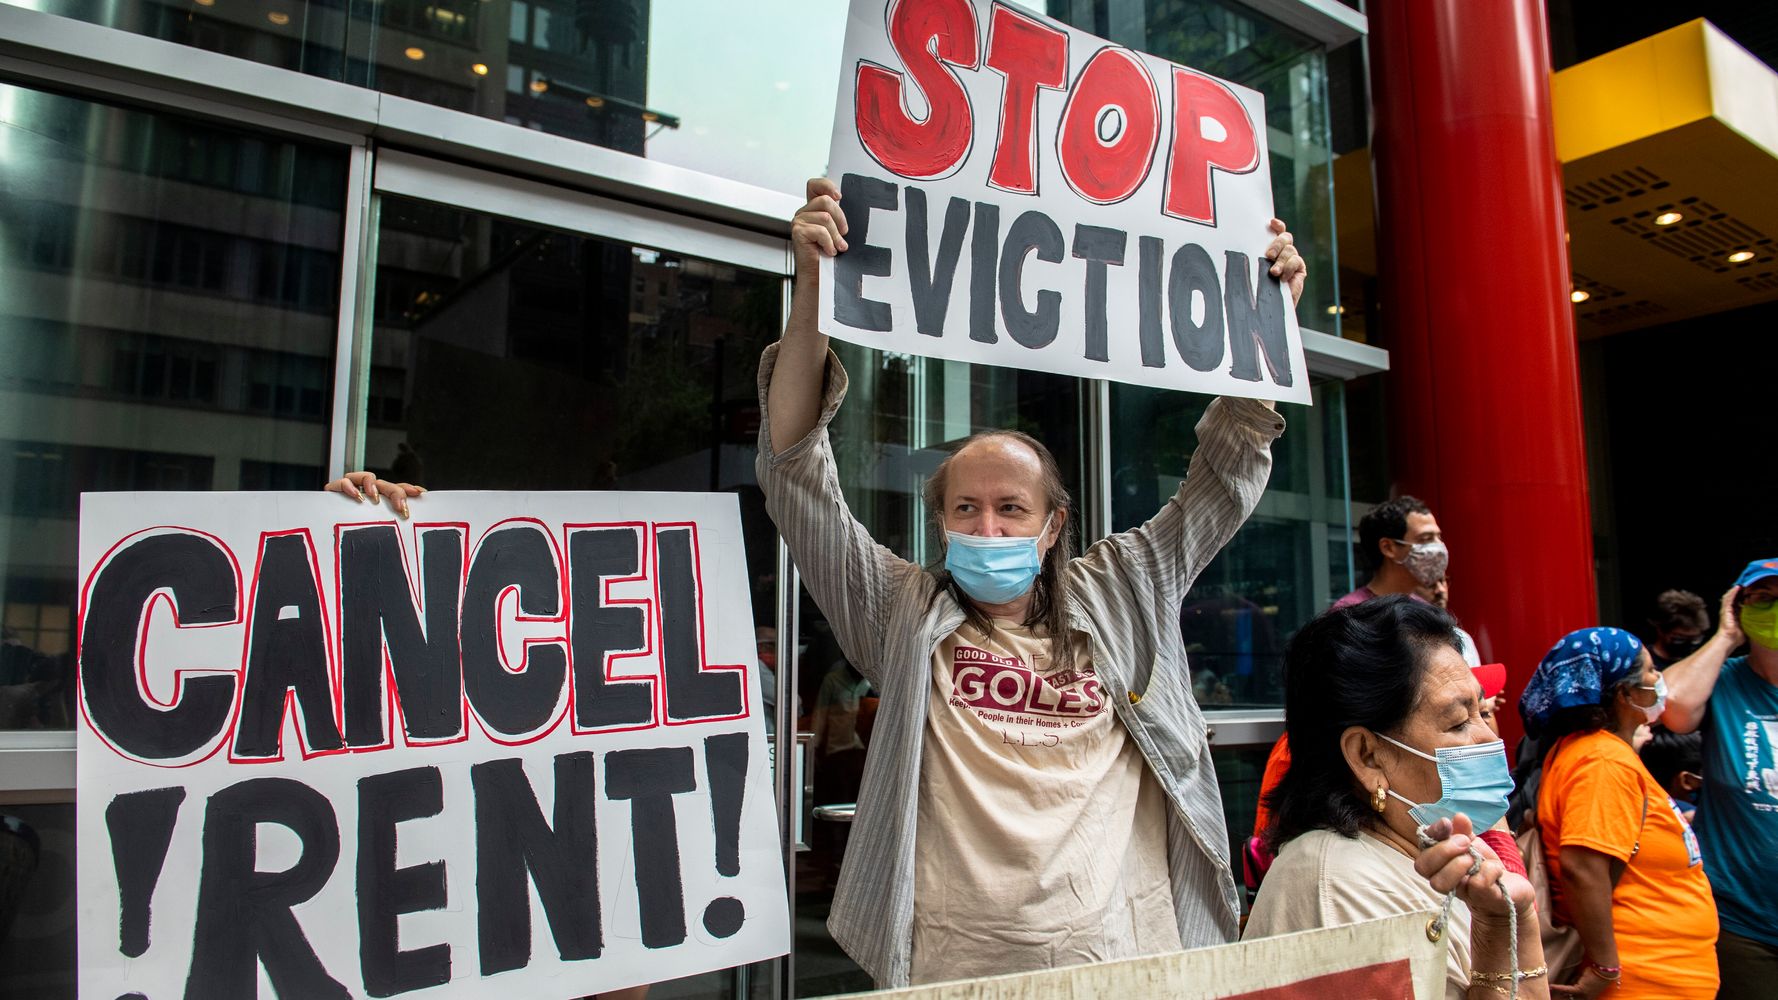 Supreme Court Allows Evictions To Resume During Pandemic